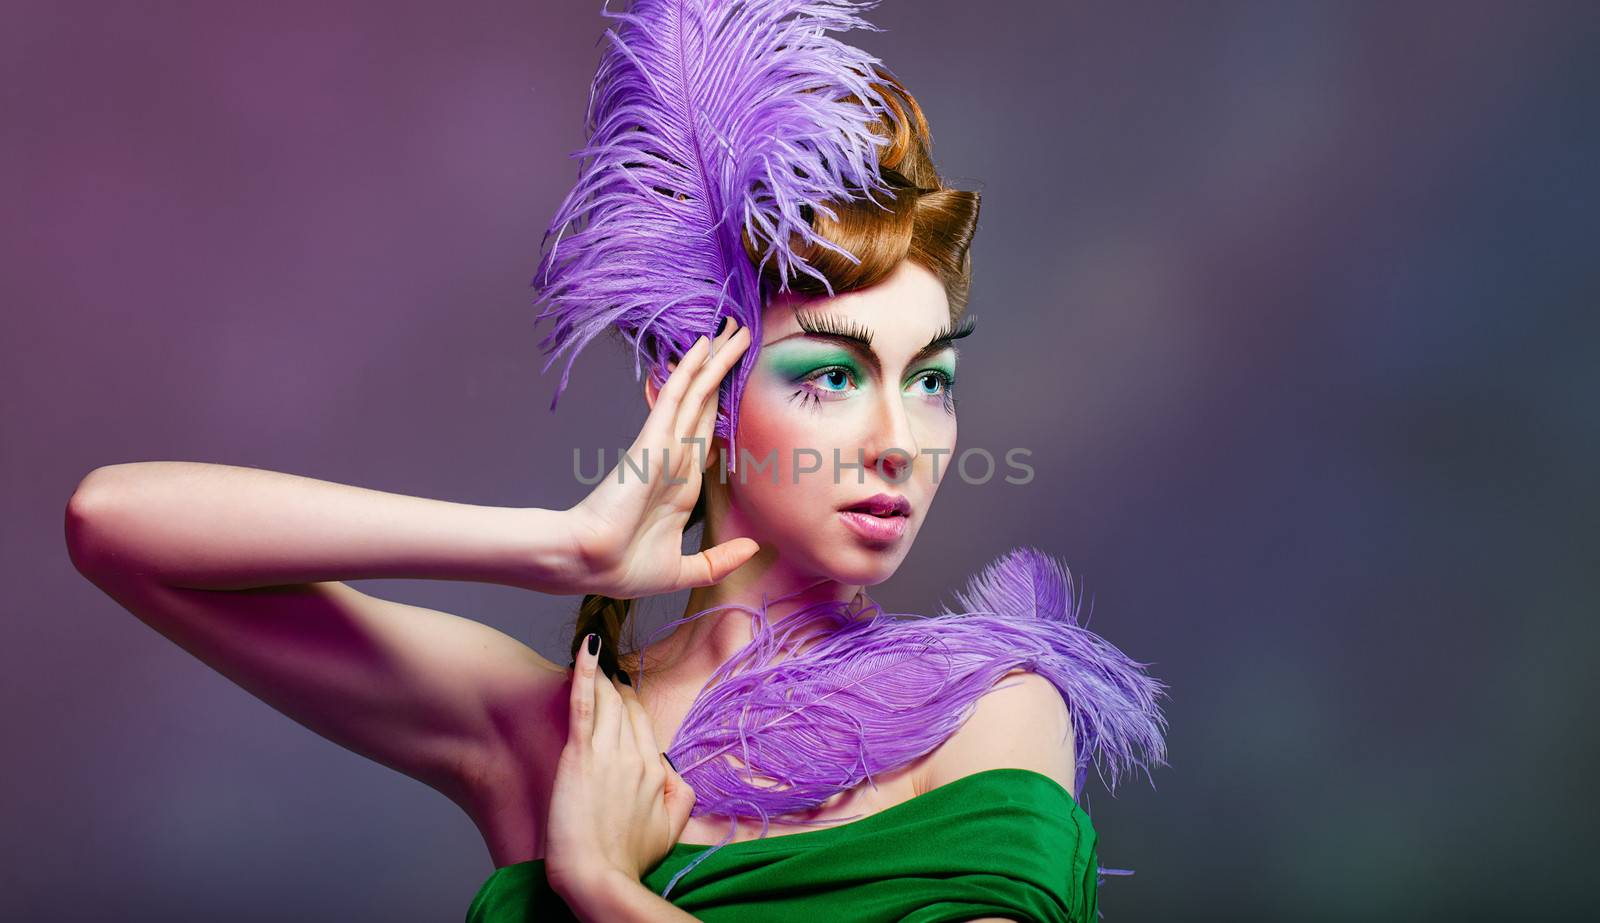 Attractive young girl with a fabulous makeup and feathers close-up portrait